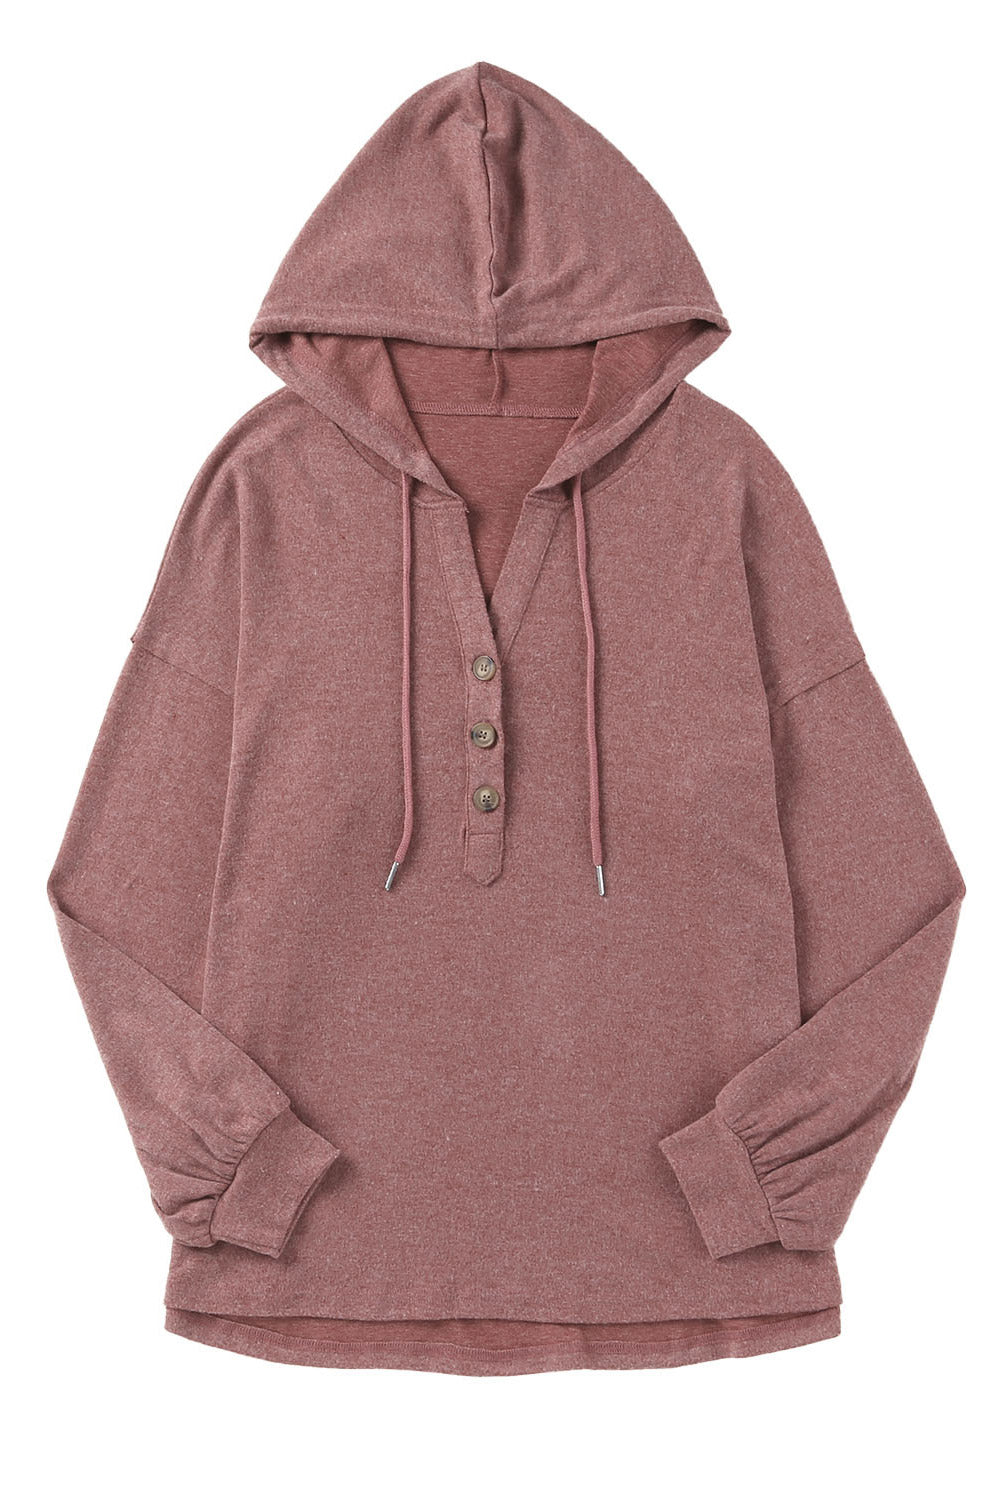 Red Casual Button High Low Hem Drawstring Hoodie